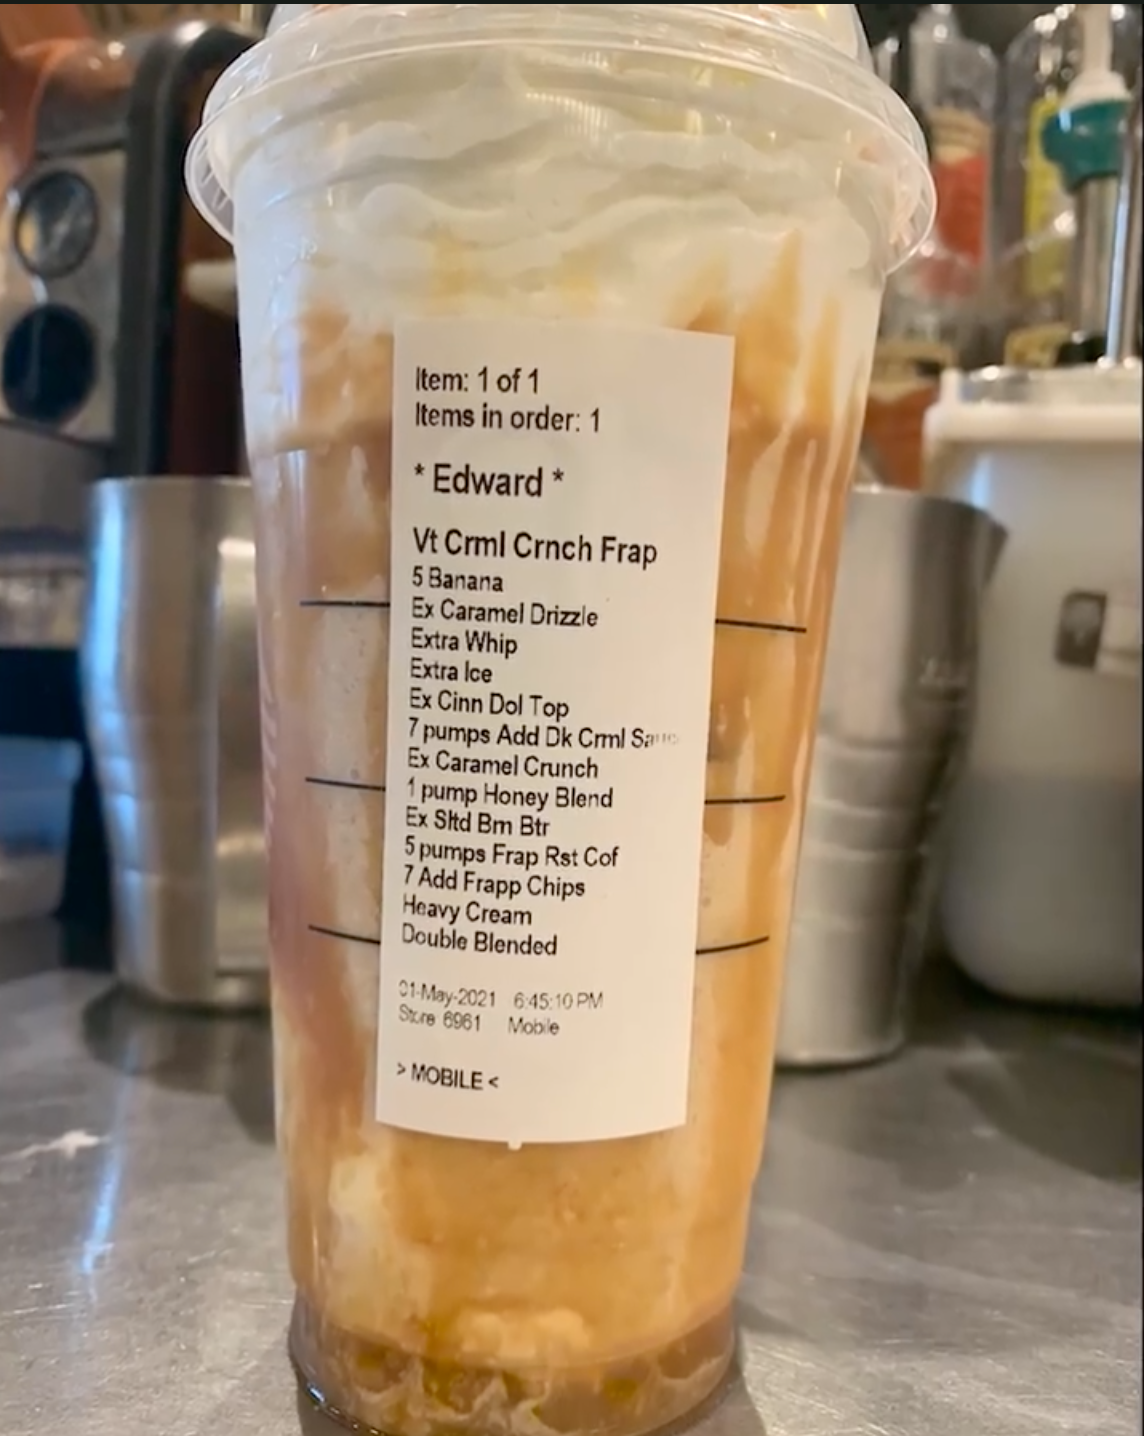 Jose Morales has struck up a friendship with the man who ordered this drink despite being fired for asking customers to stop requesting them.